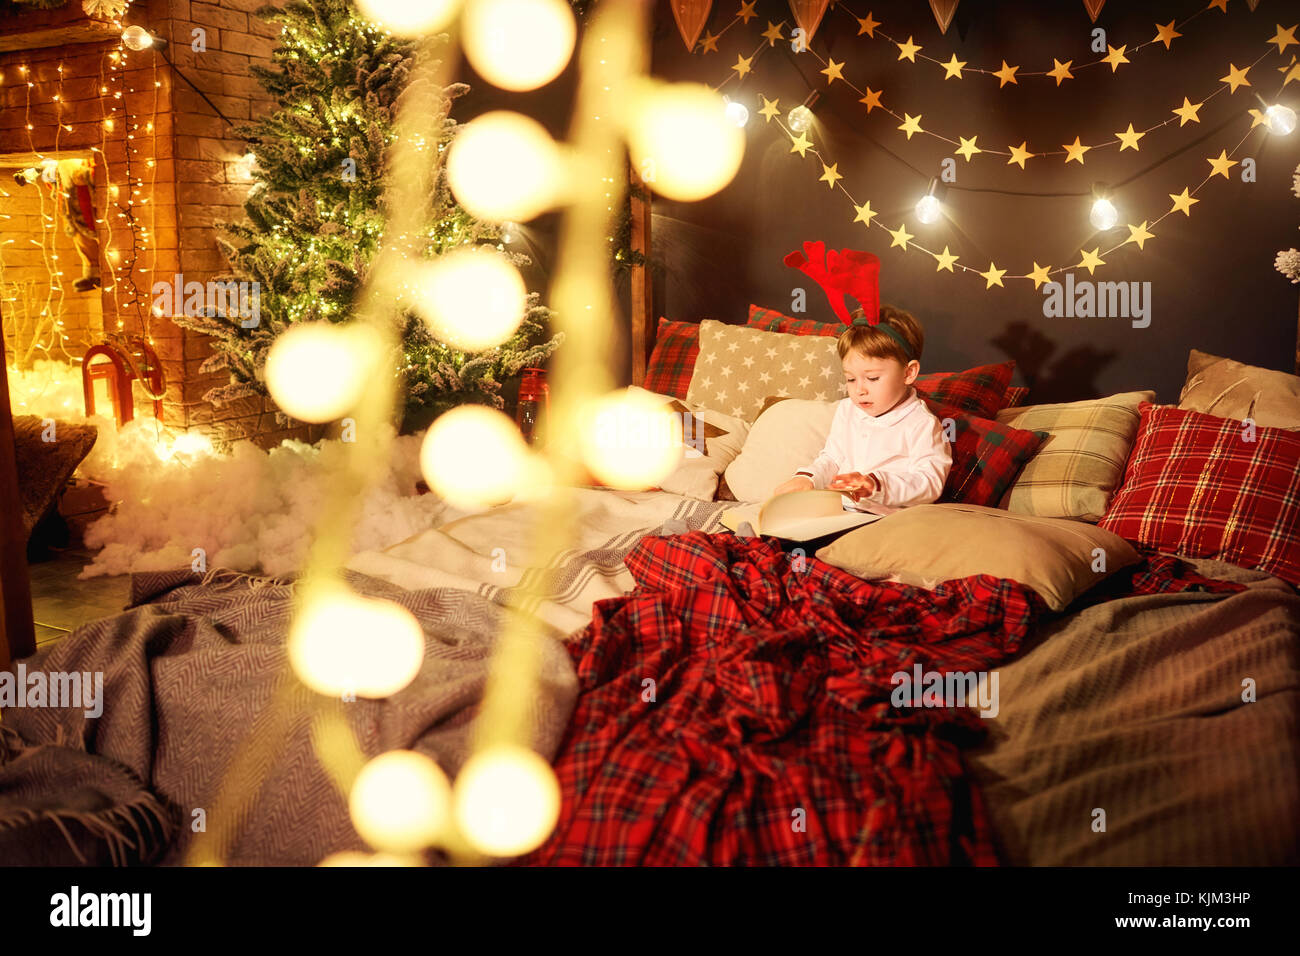 A child little boy is reading a book in the Christmas room Stock Photo